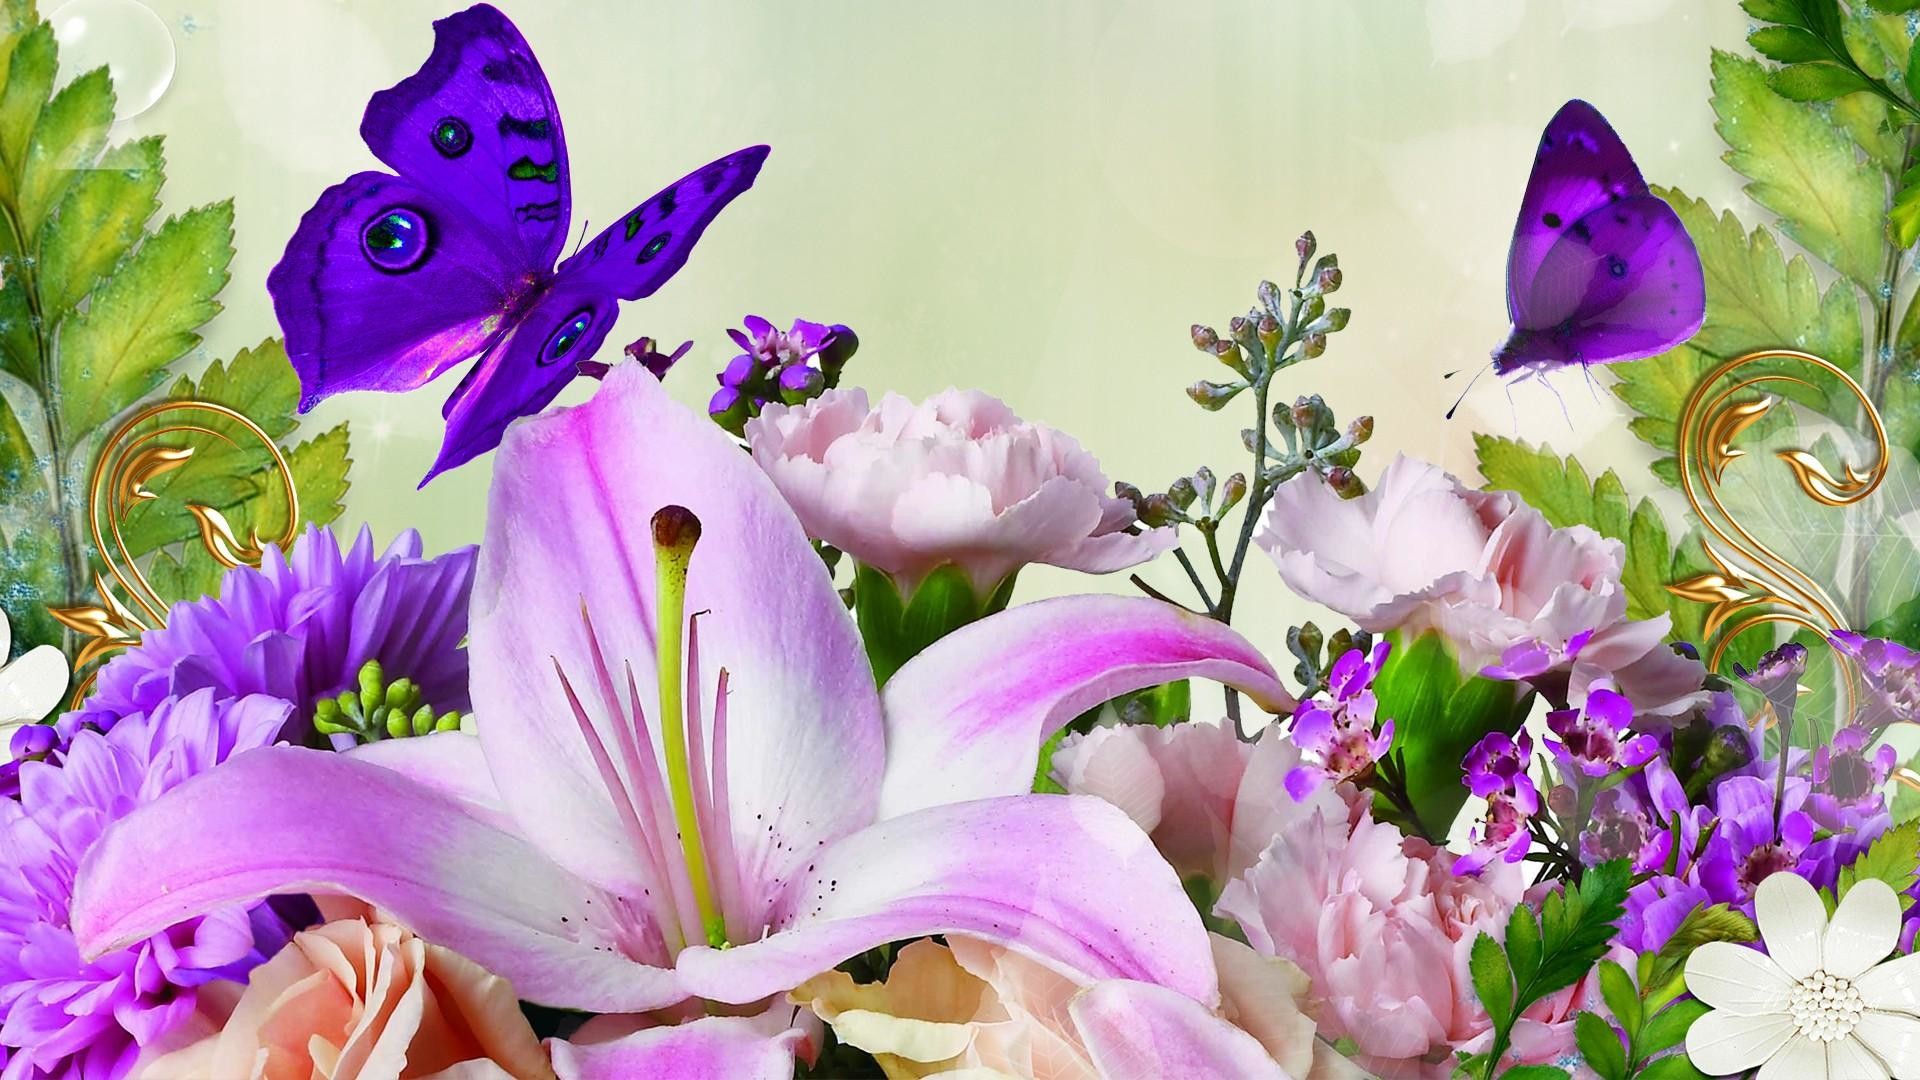 1920x1080  Purple Flower clipart butterfly wallpaper - Pencil and in color .